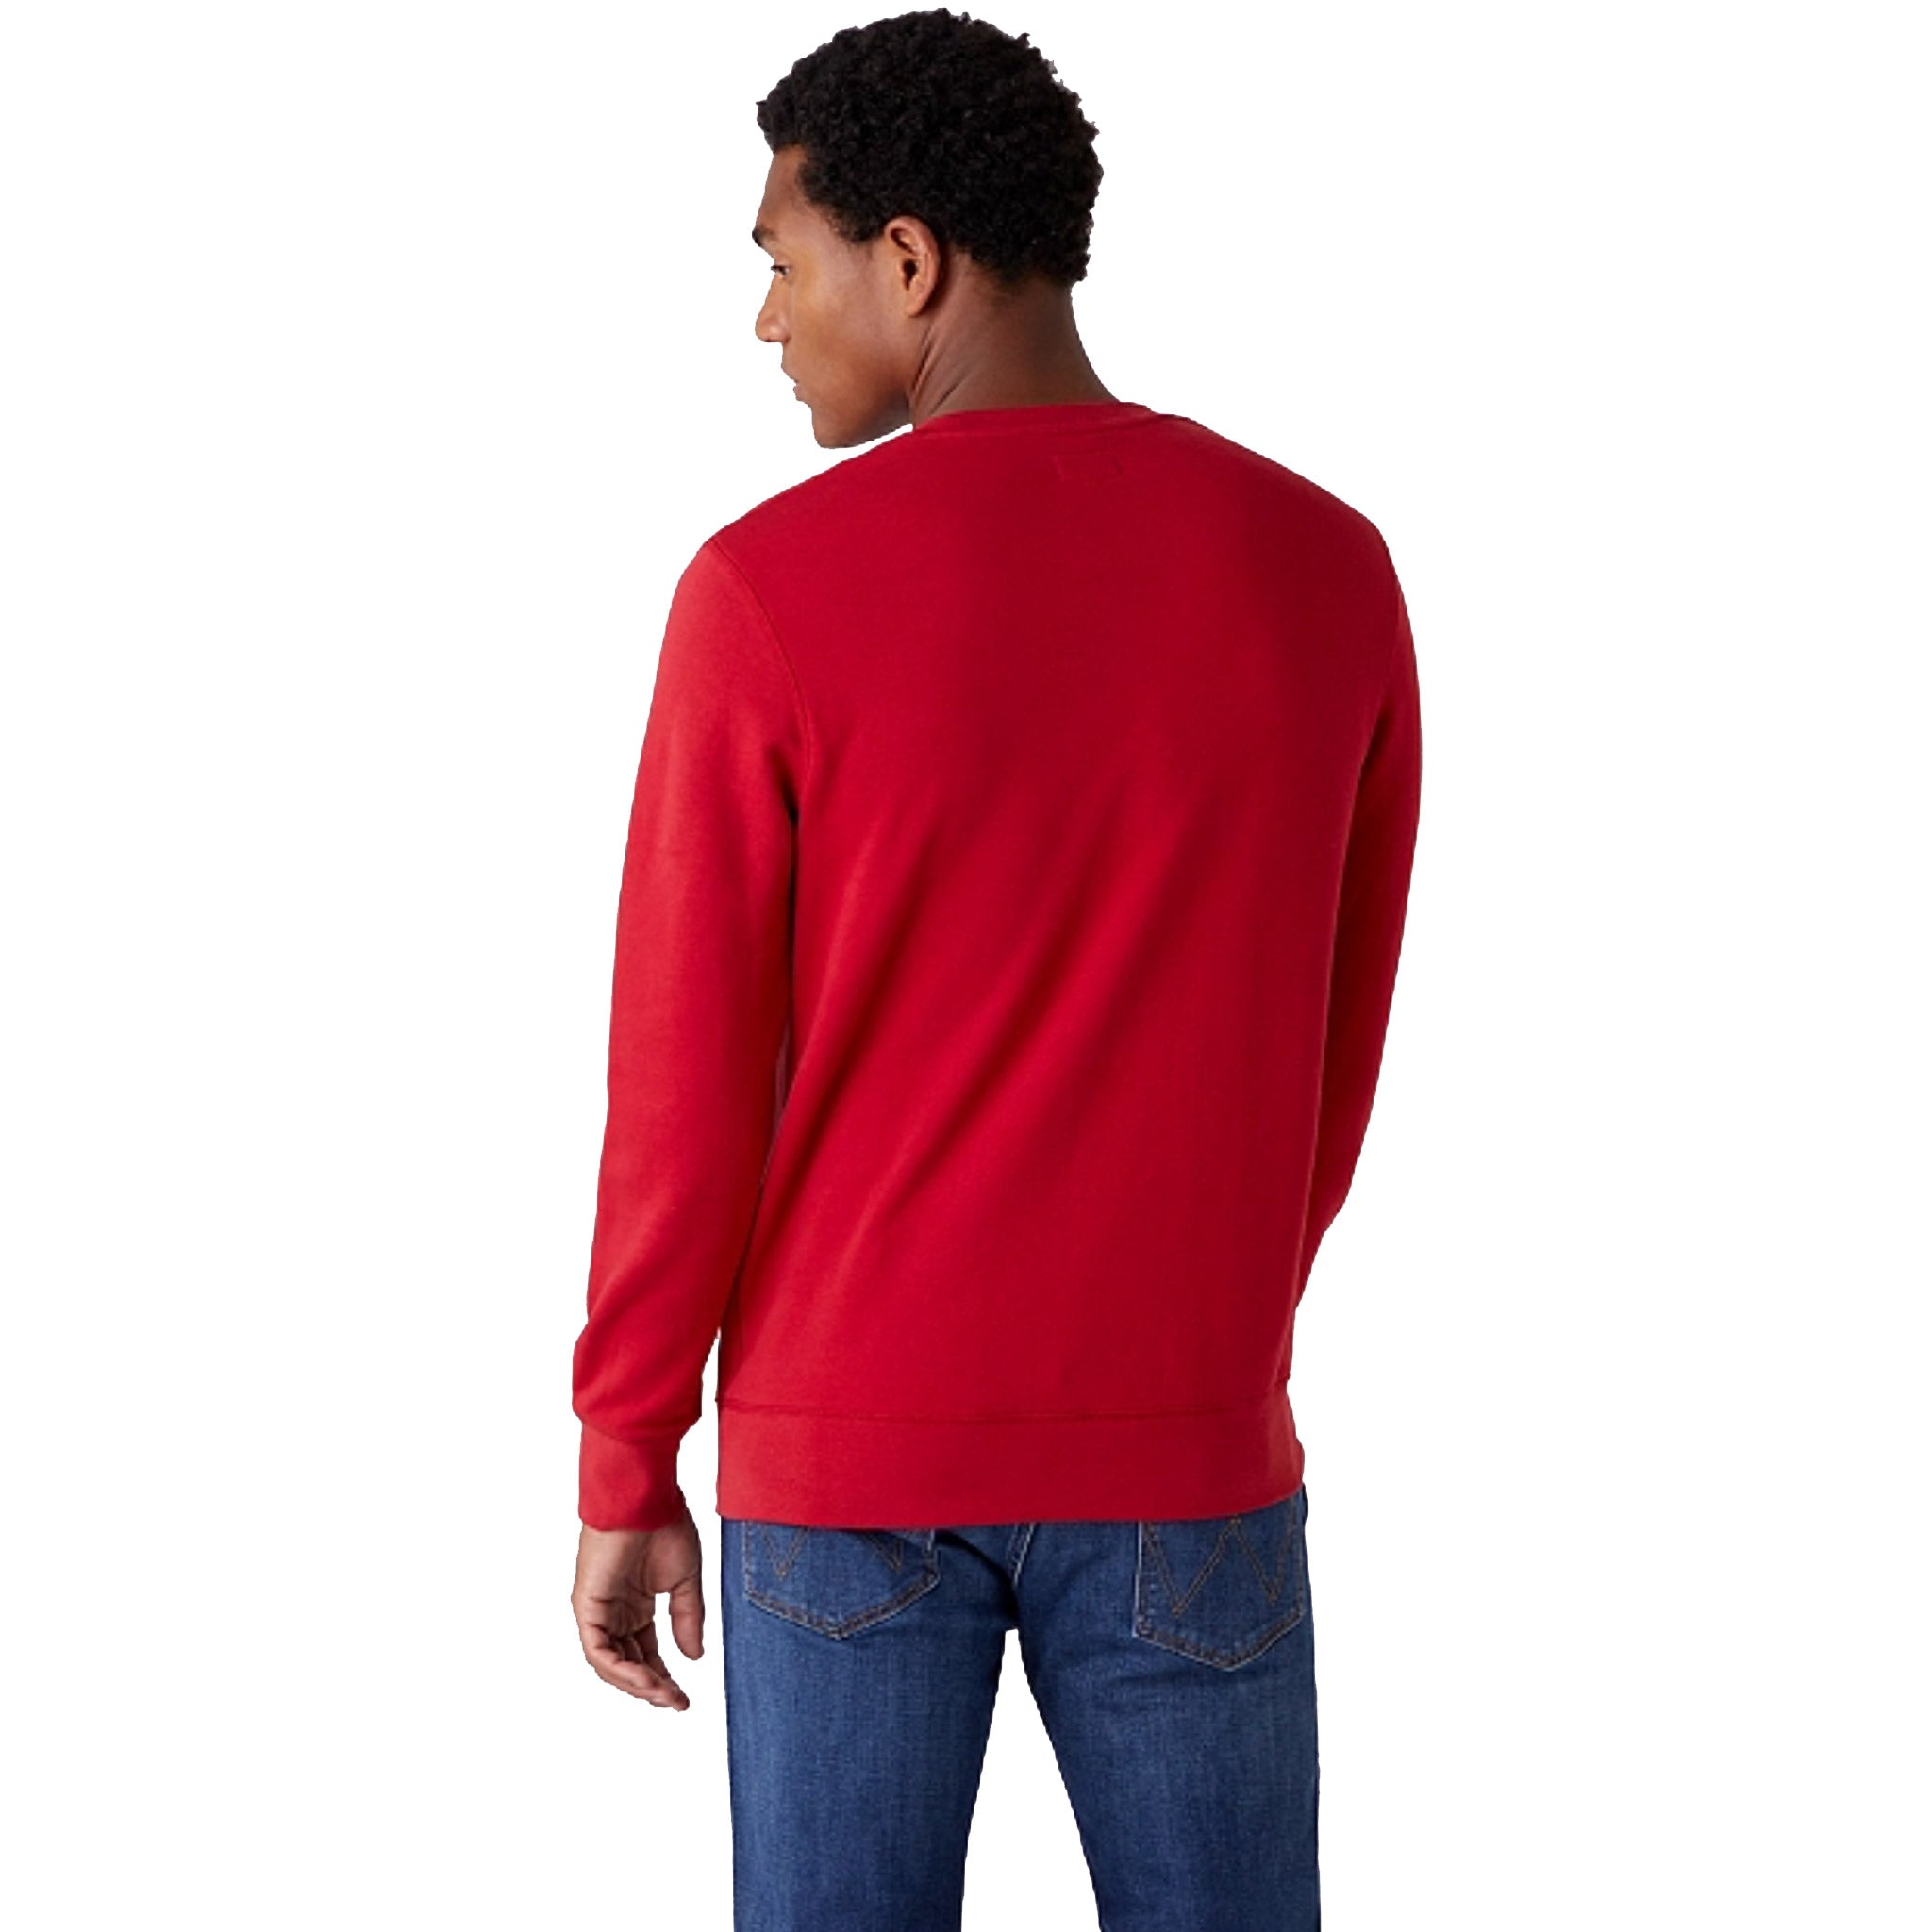 Wrangler Sign Off Sweatshirt in Red Worn By Model Shown From Behind